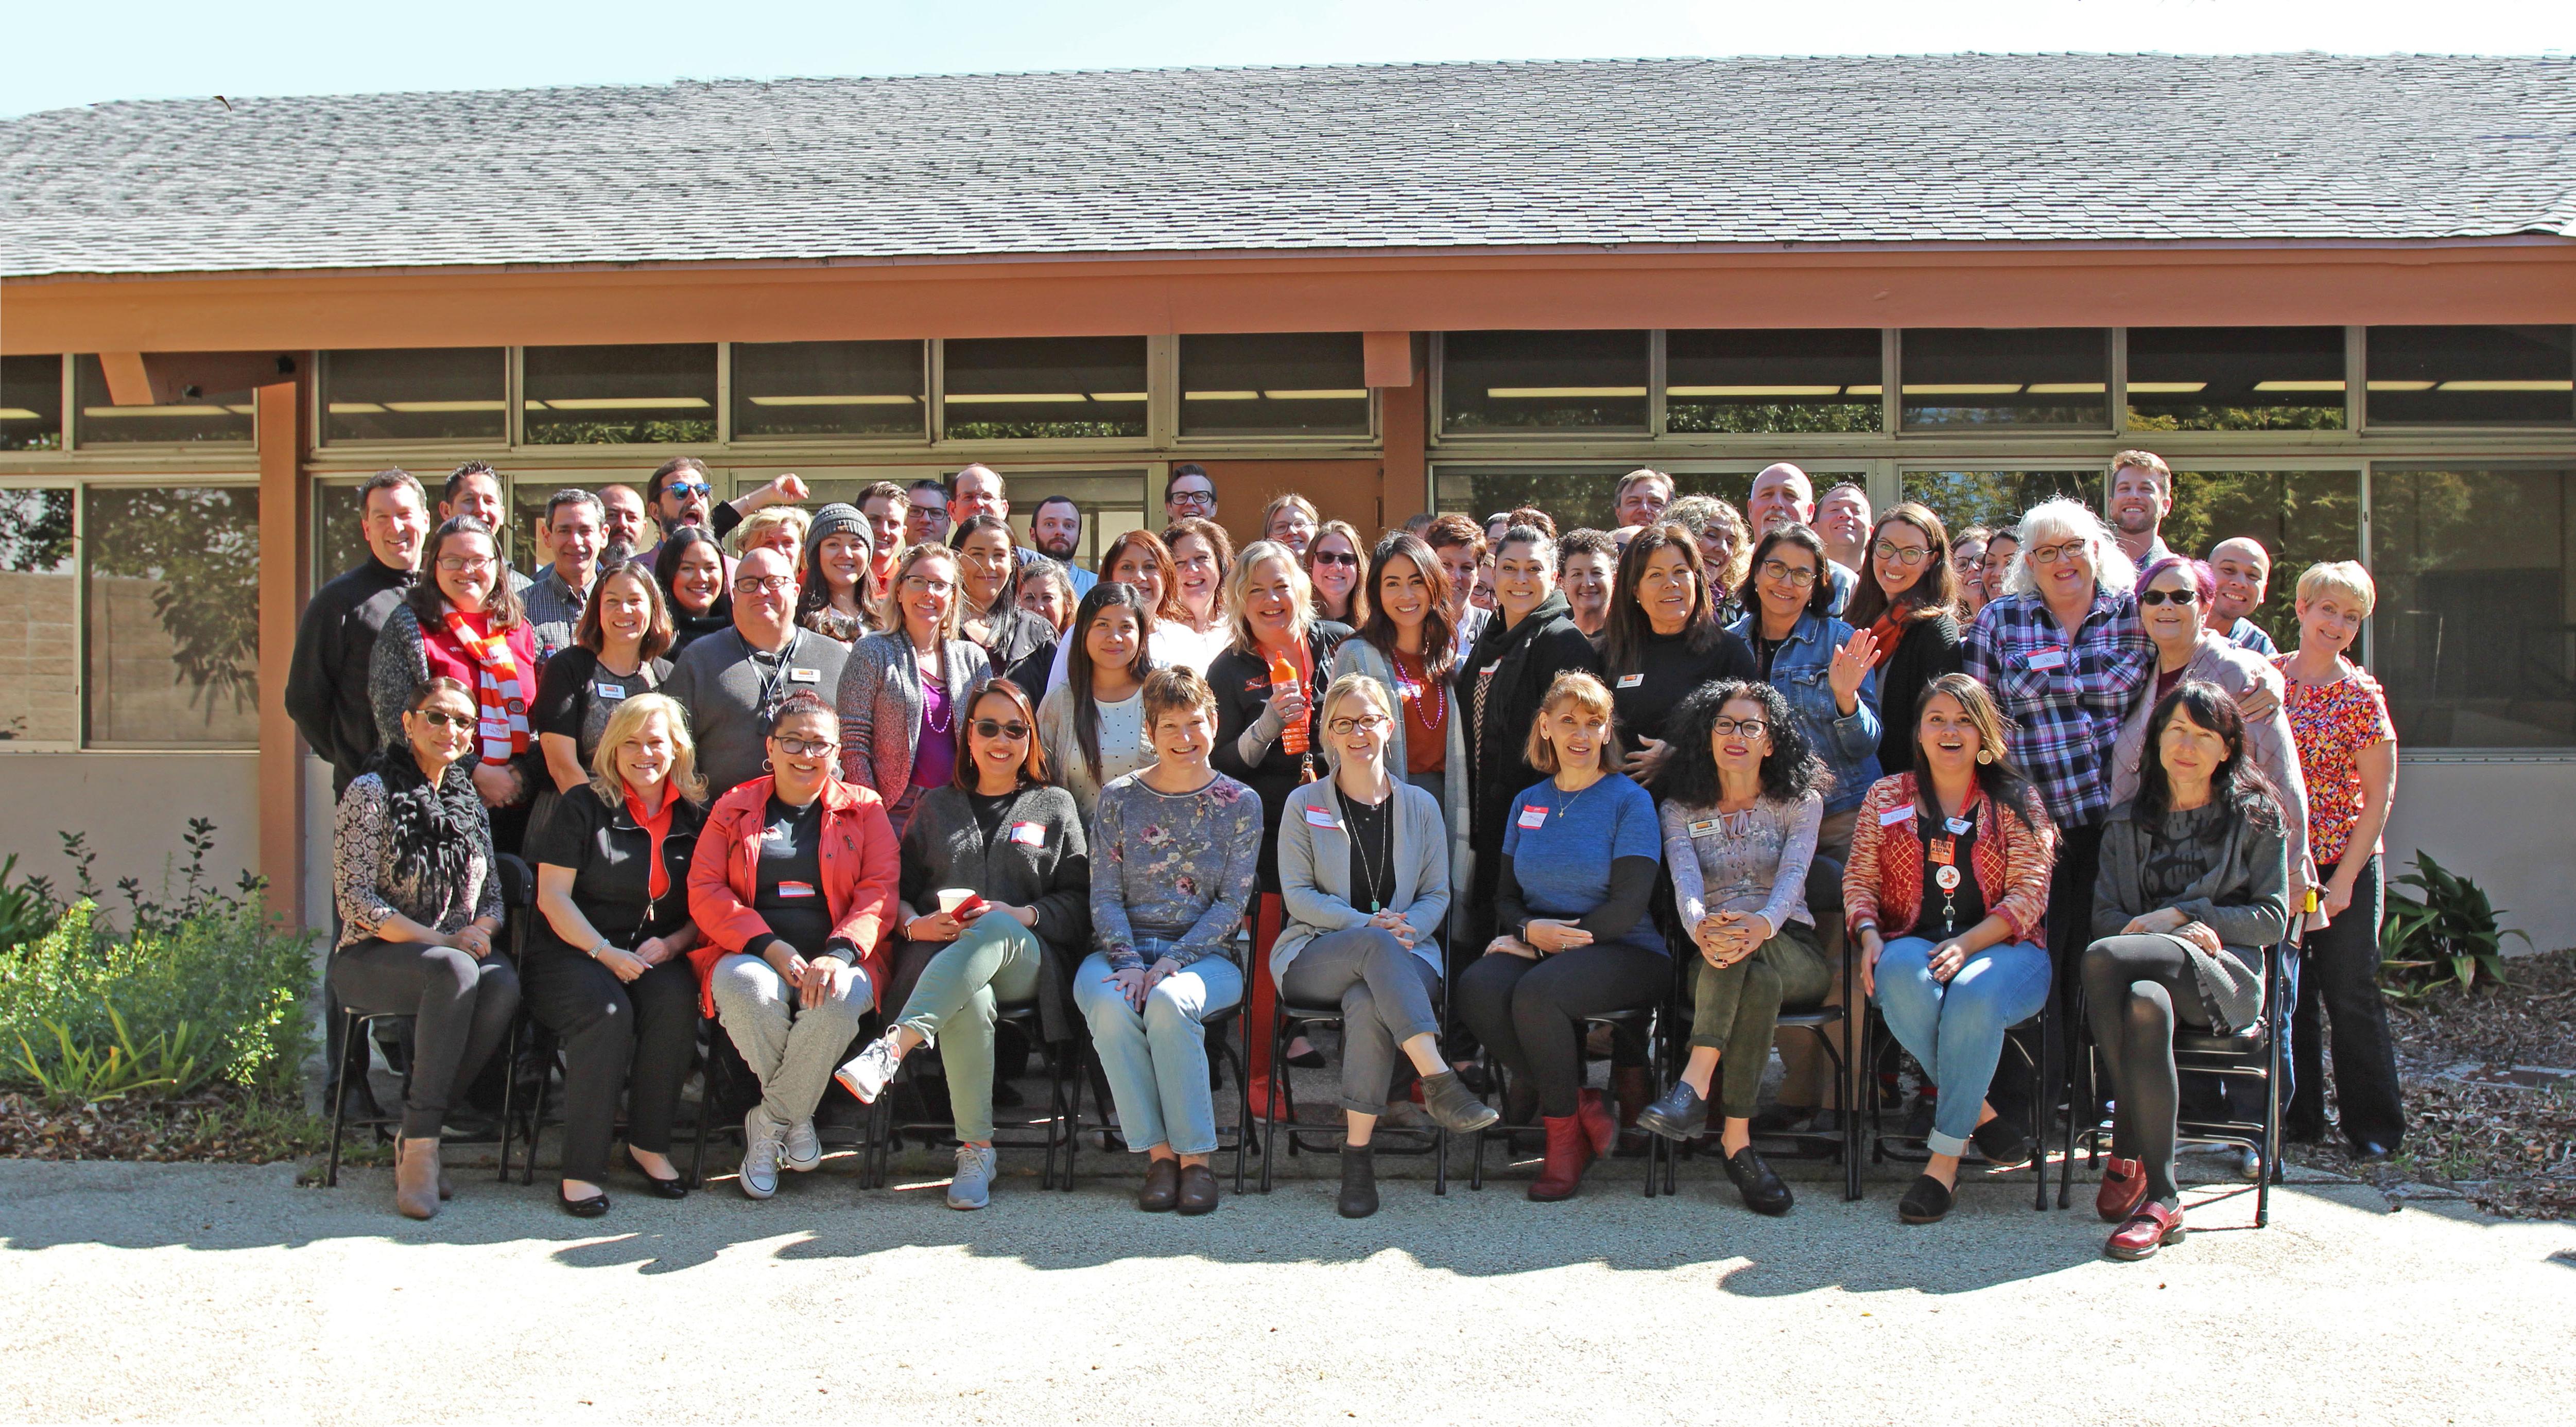 Group Photo of 澳门皇家赌城在线大学 staff at college wide even in the patio of Wright Event Center. The sun is shinning.